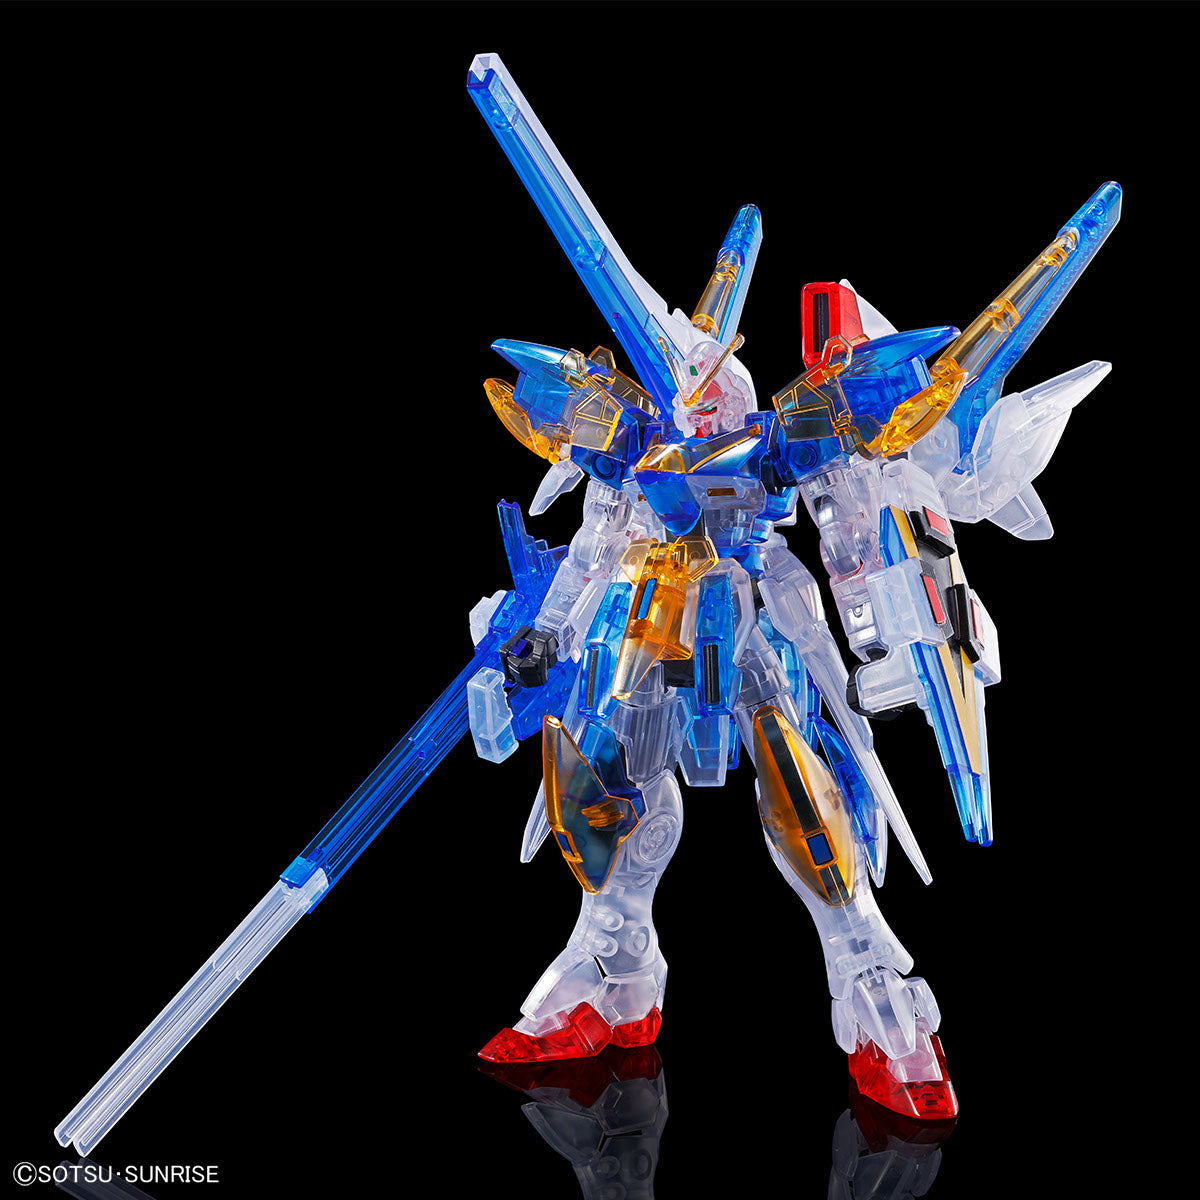 PREVENTA HG 1/144 Victory Two Assault Buster [Clear color] Gundam